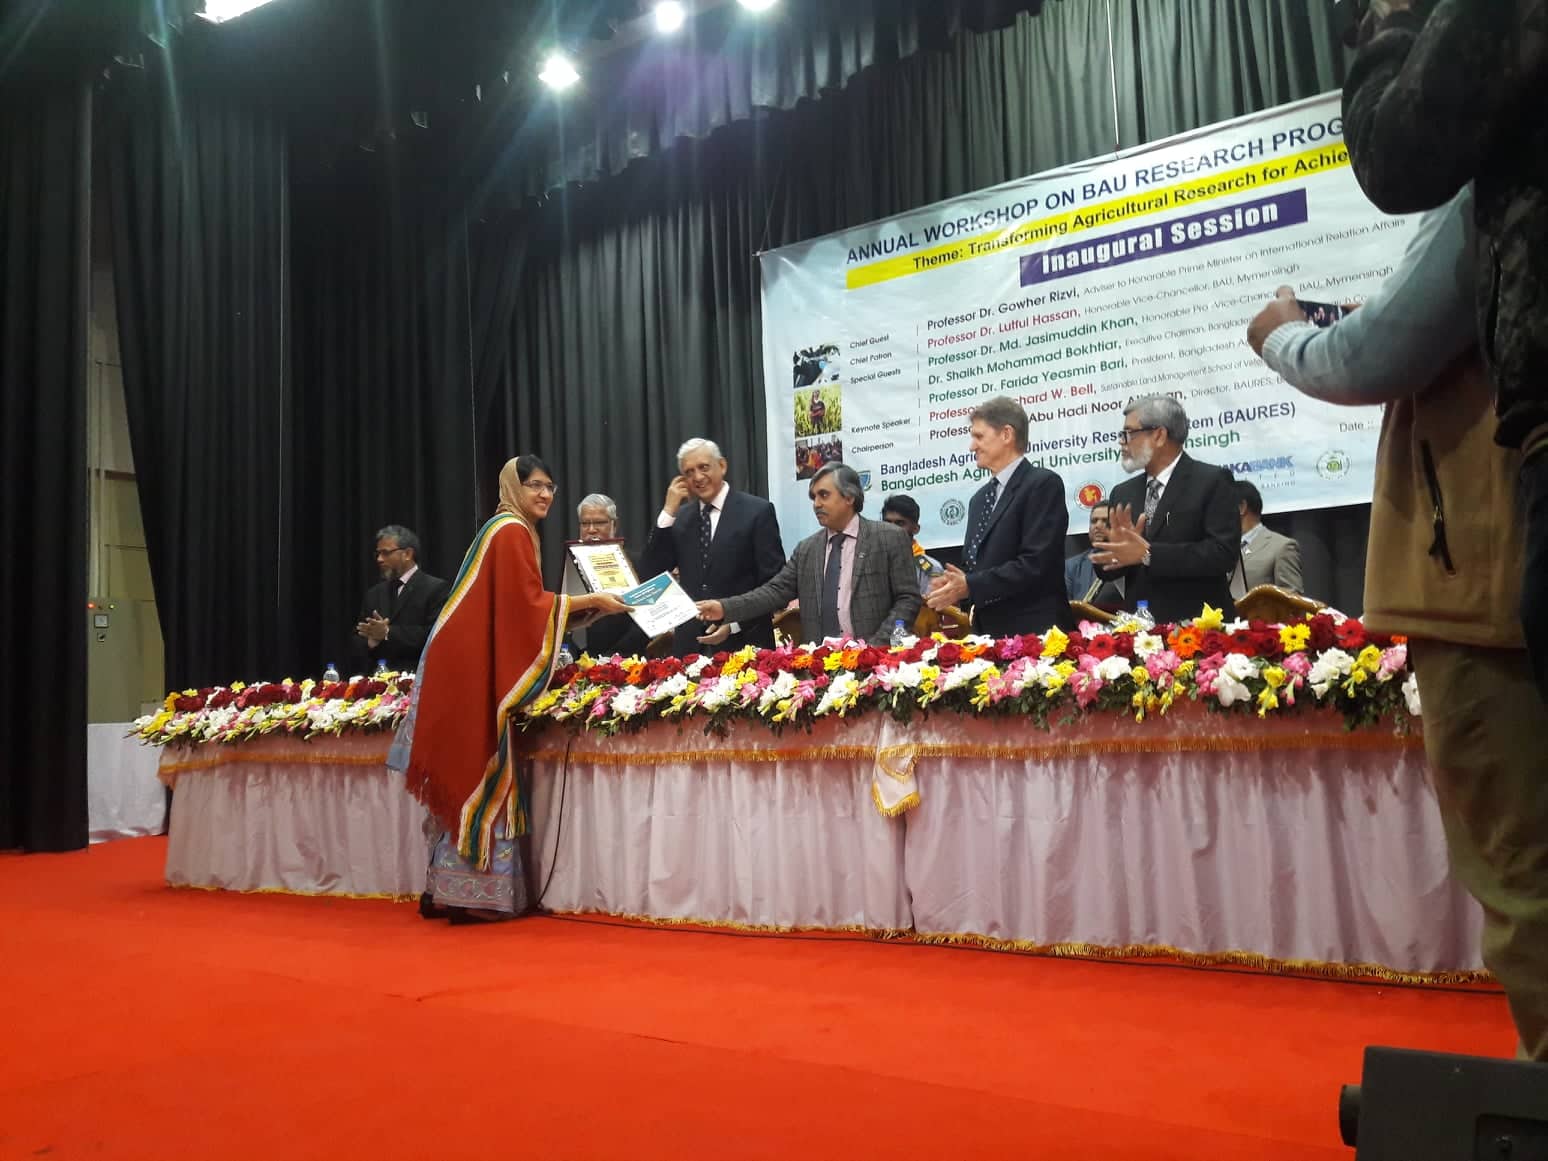 My wife is receiving the award (on behalf of me) from Vice-Chancellor, BAU